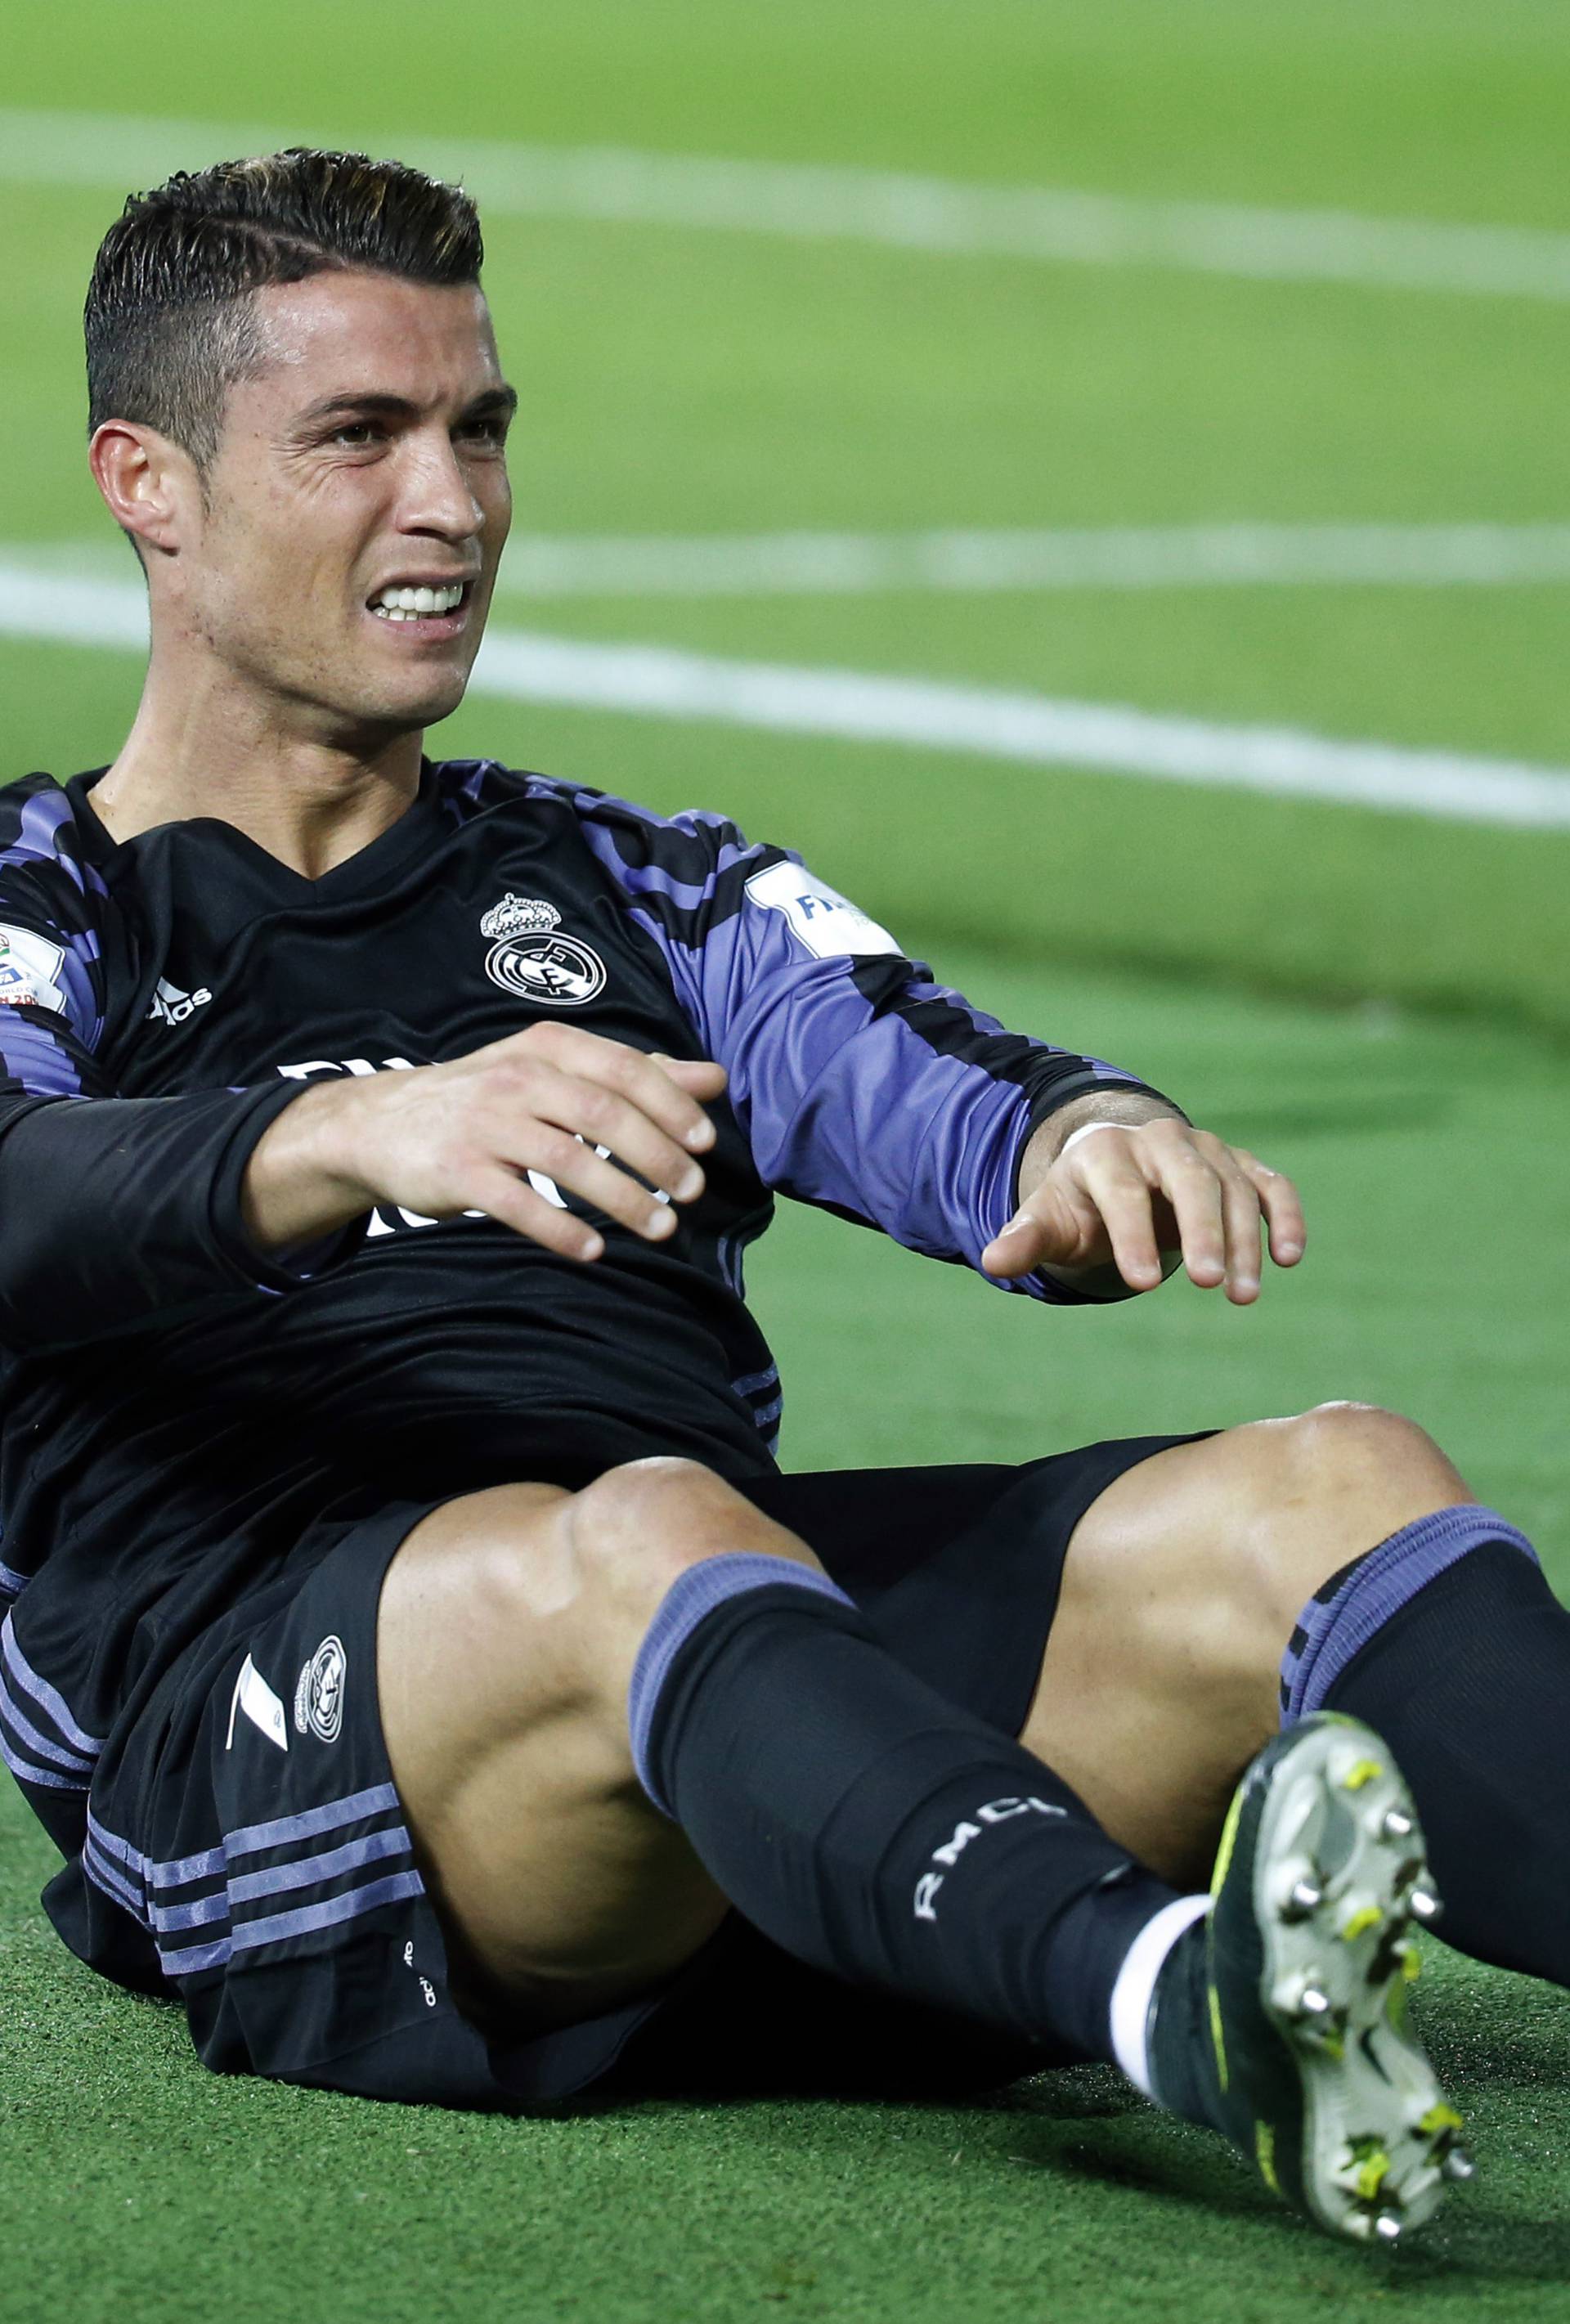 Real Madrid's Cristiano Ronaldo after sustaining an injury